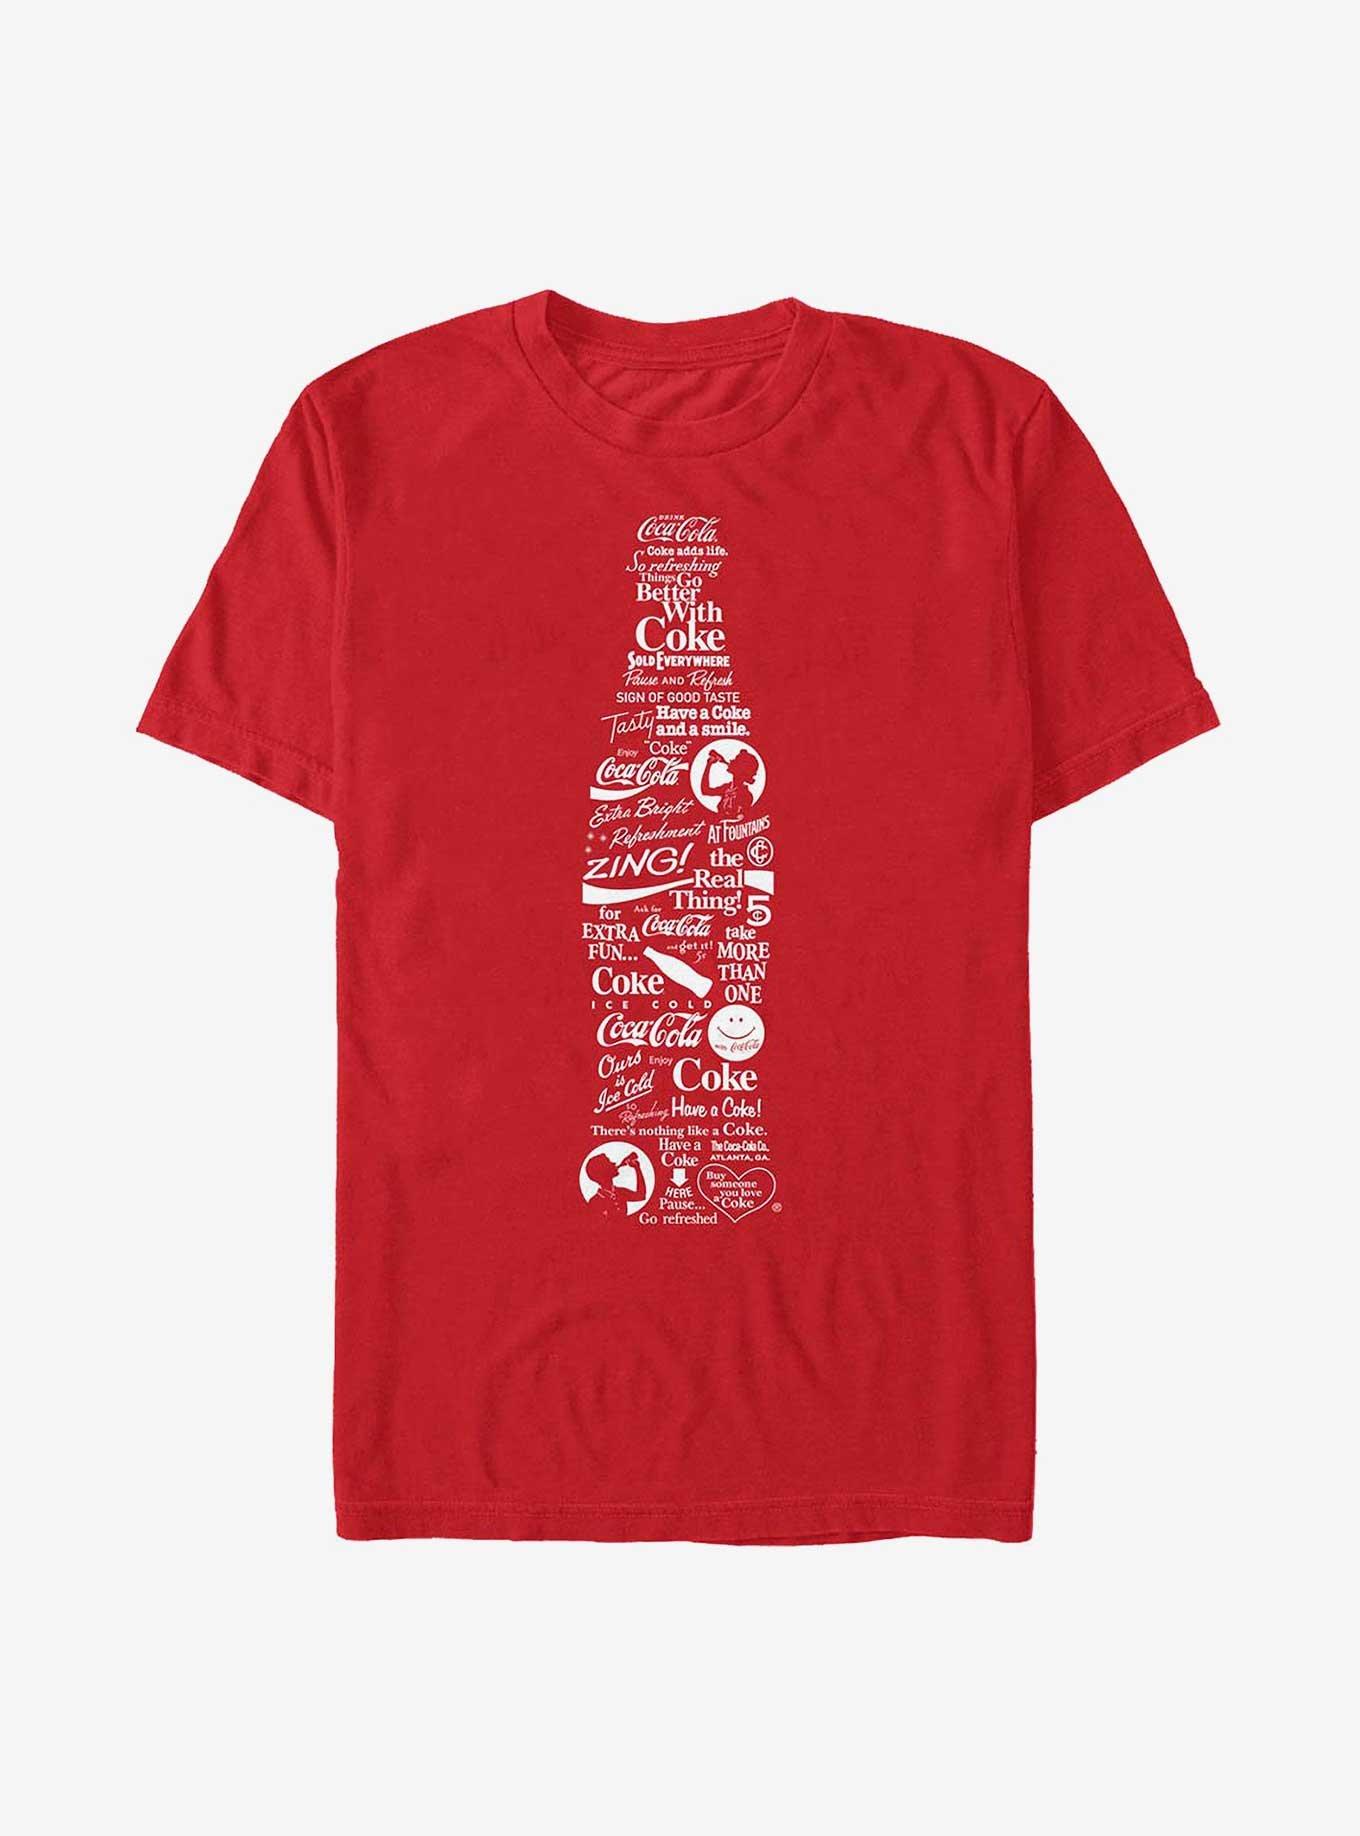 Coca-Cola Collectable Coke T-Shirt, RED, hi-res